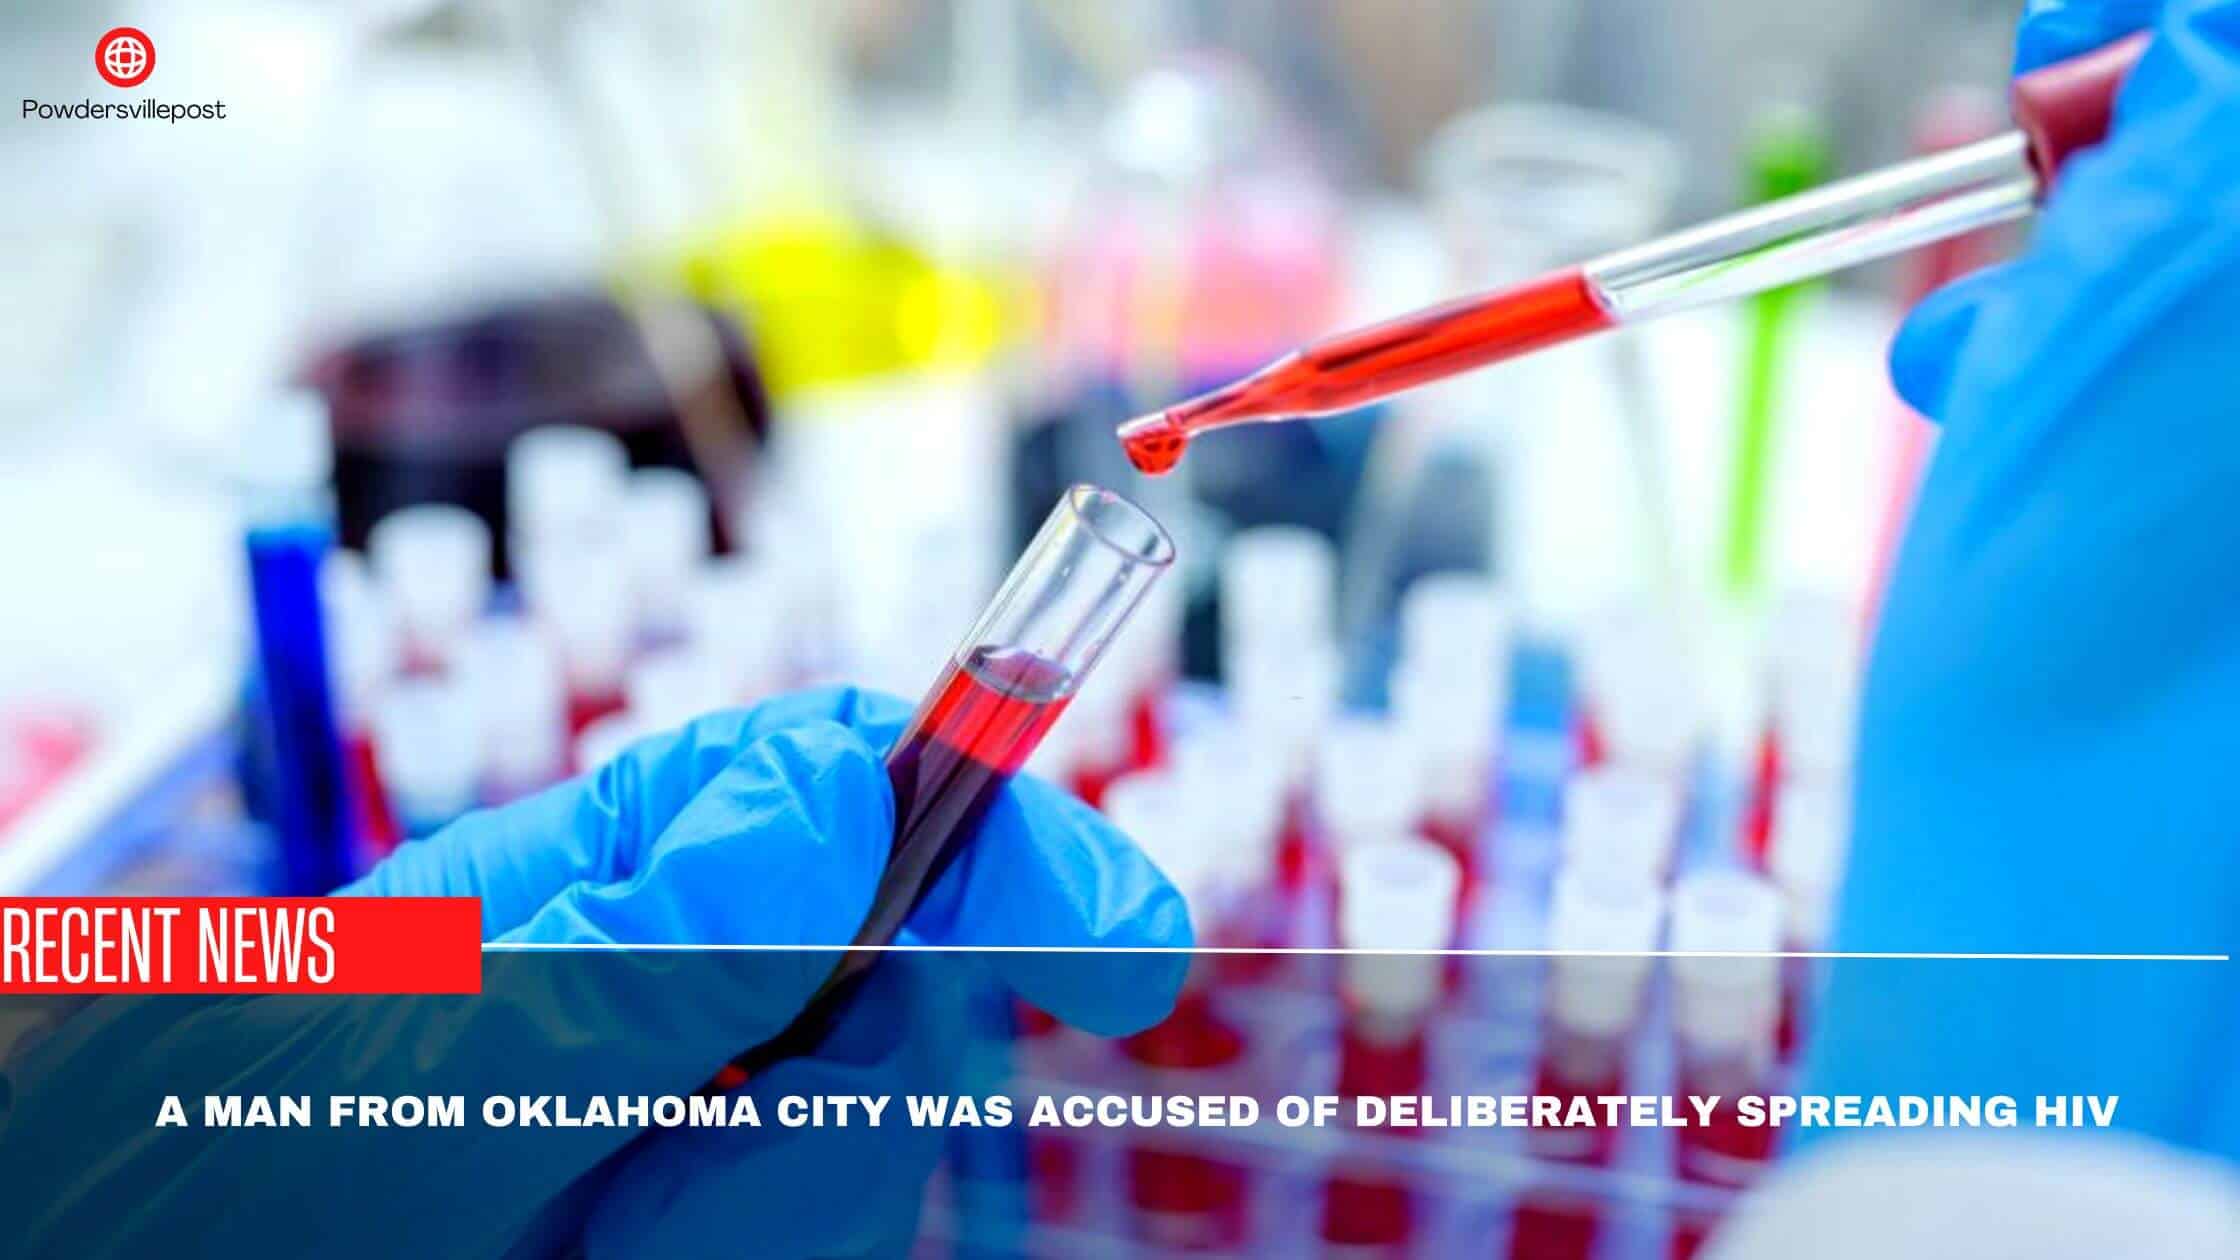 A Man From Oklahoma City Was Accused Of Deliberately Spreading HIV